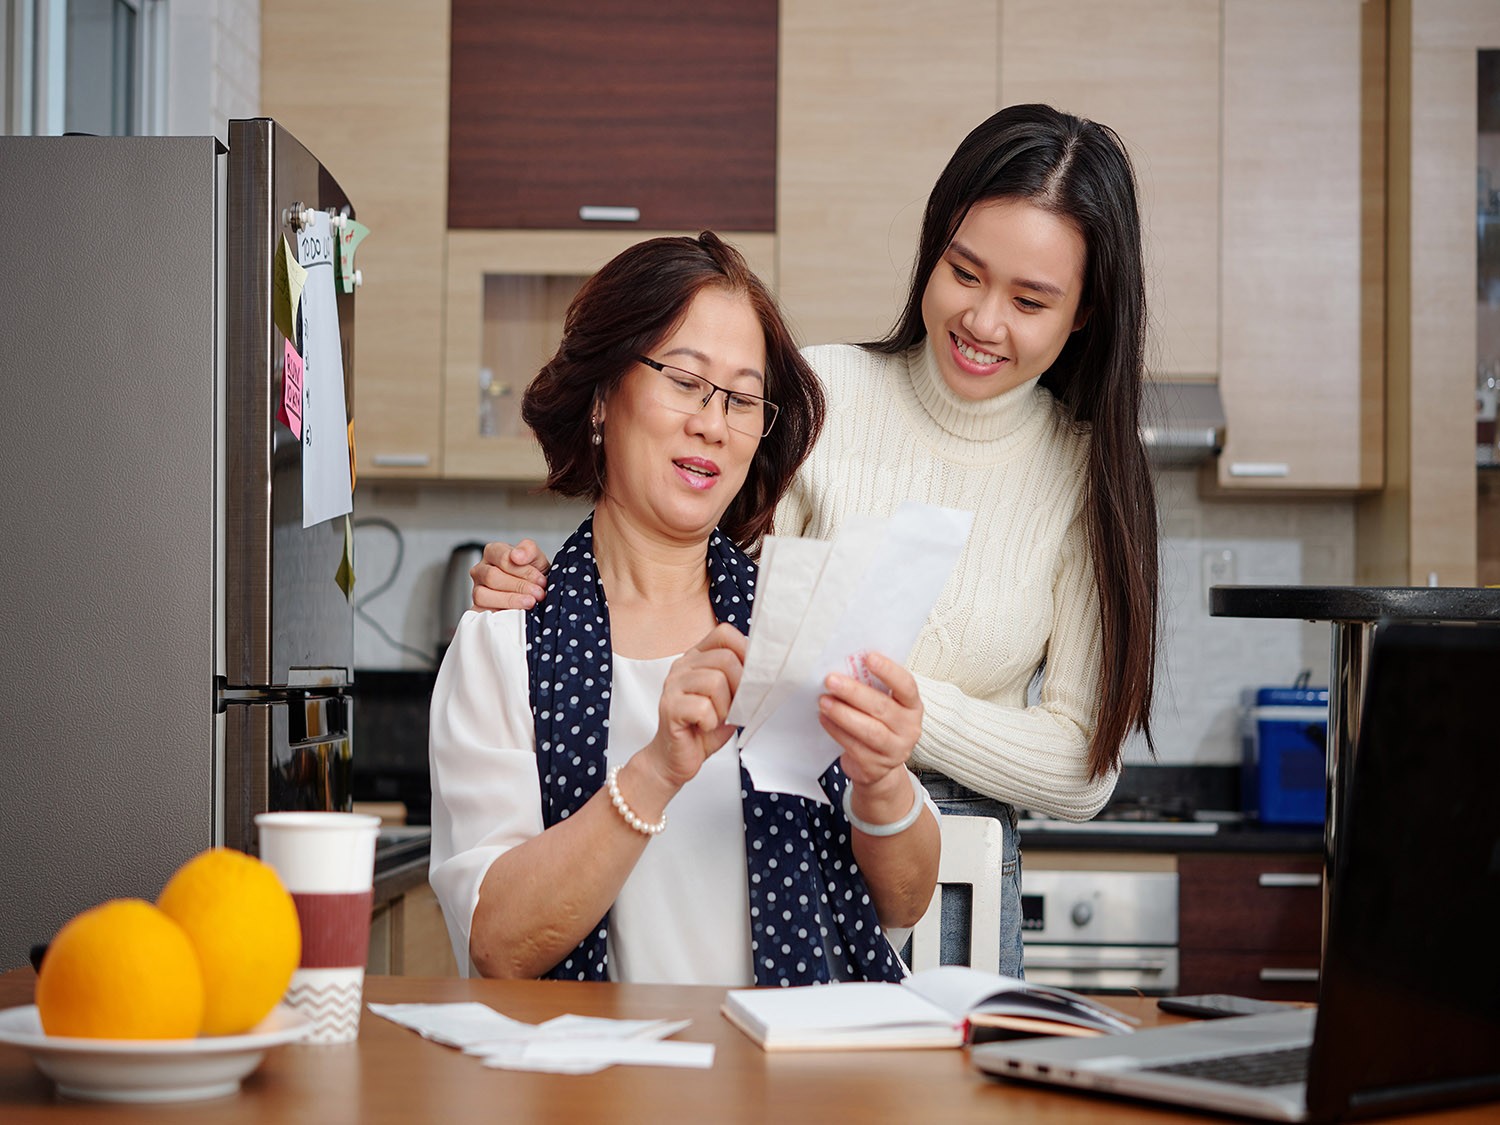 Mother and daughter go over bills together in the kitchen.